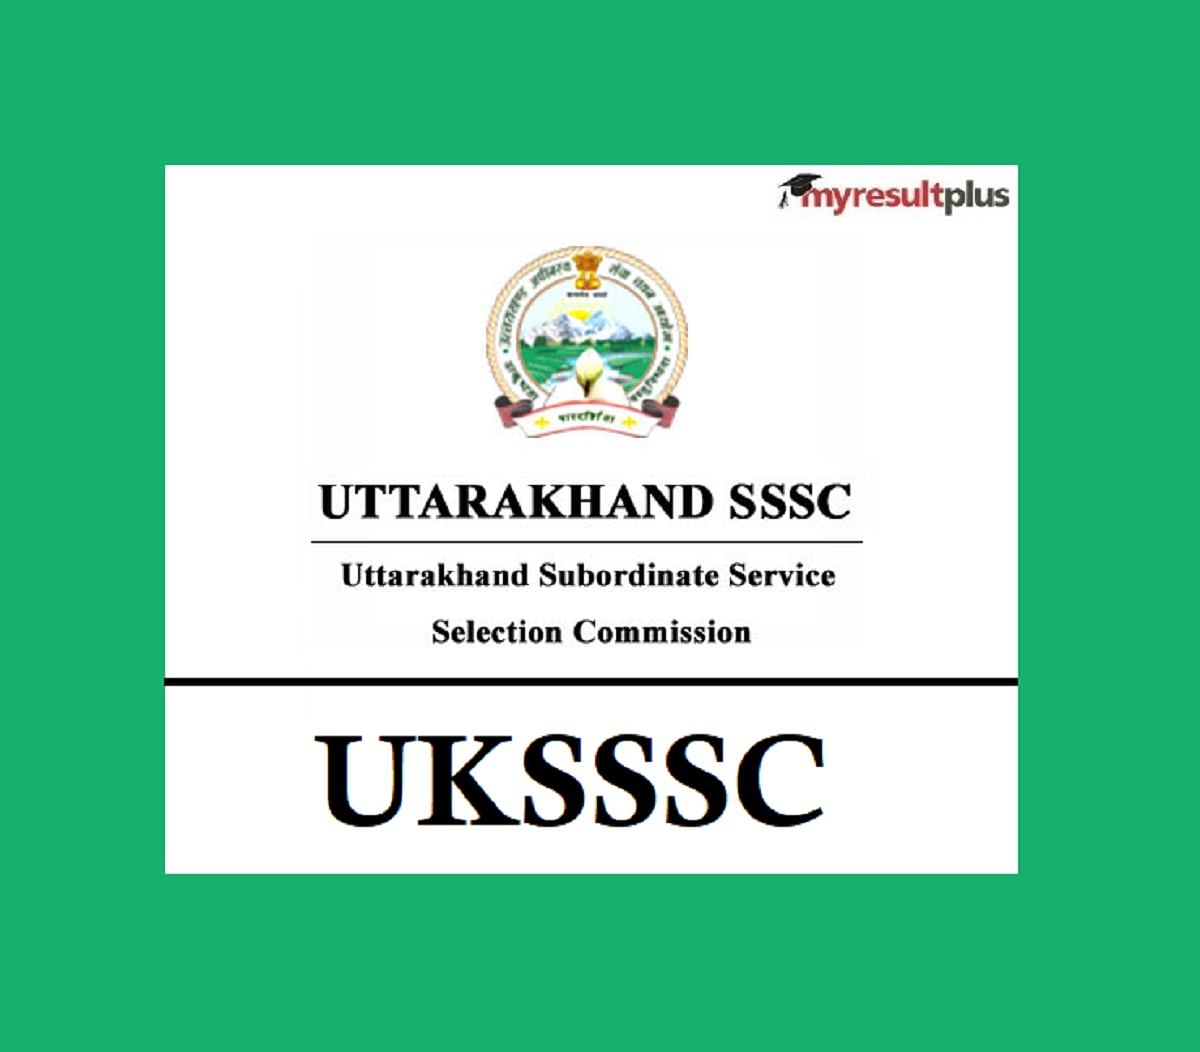 UKSSSC Recruitment 2022: Notification for 1521 Constable, Fireman Posts OUT, Application Starts on January 03